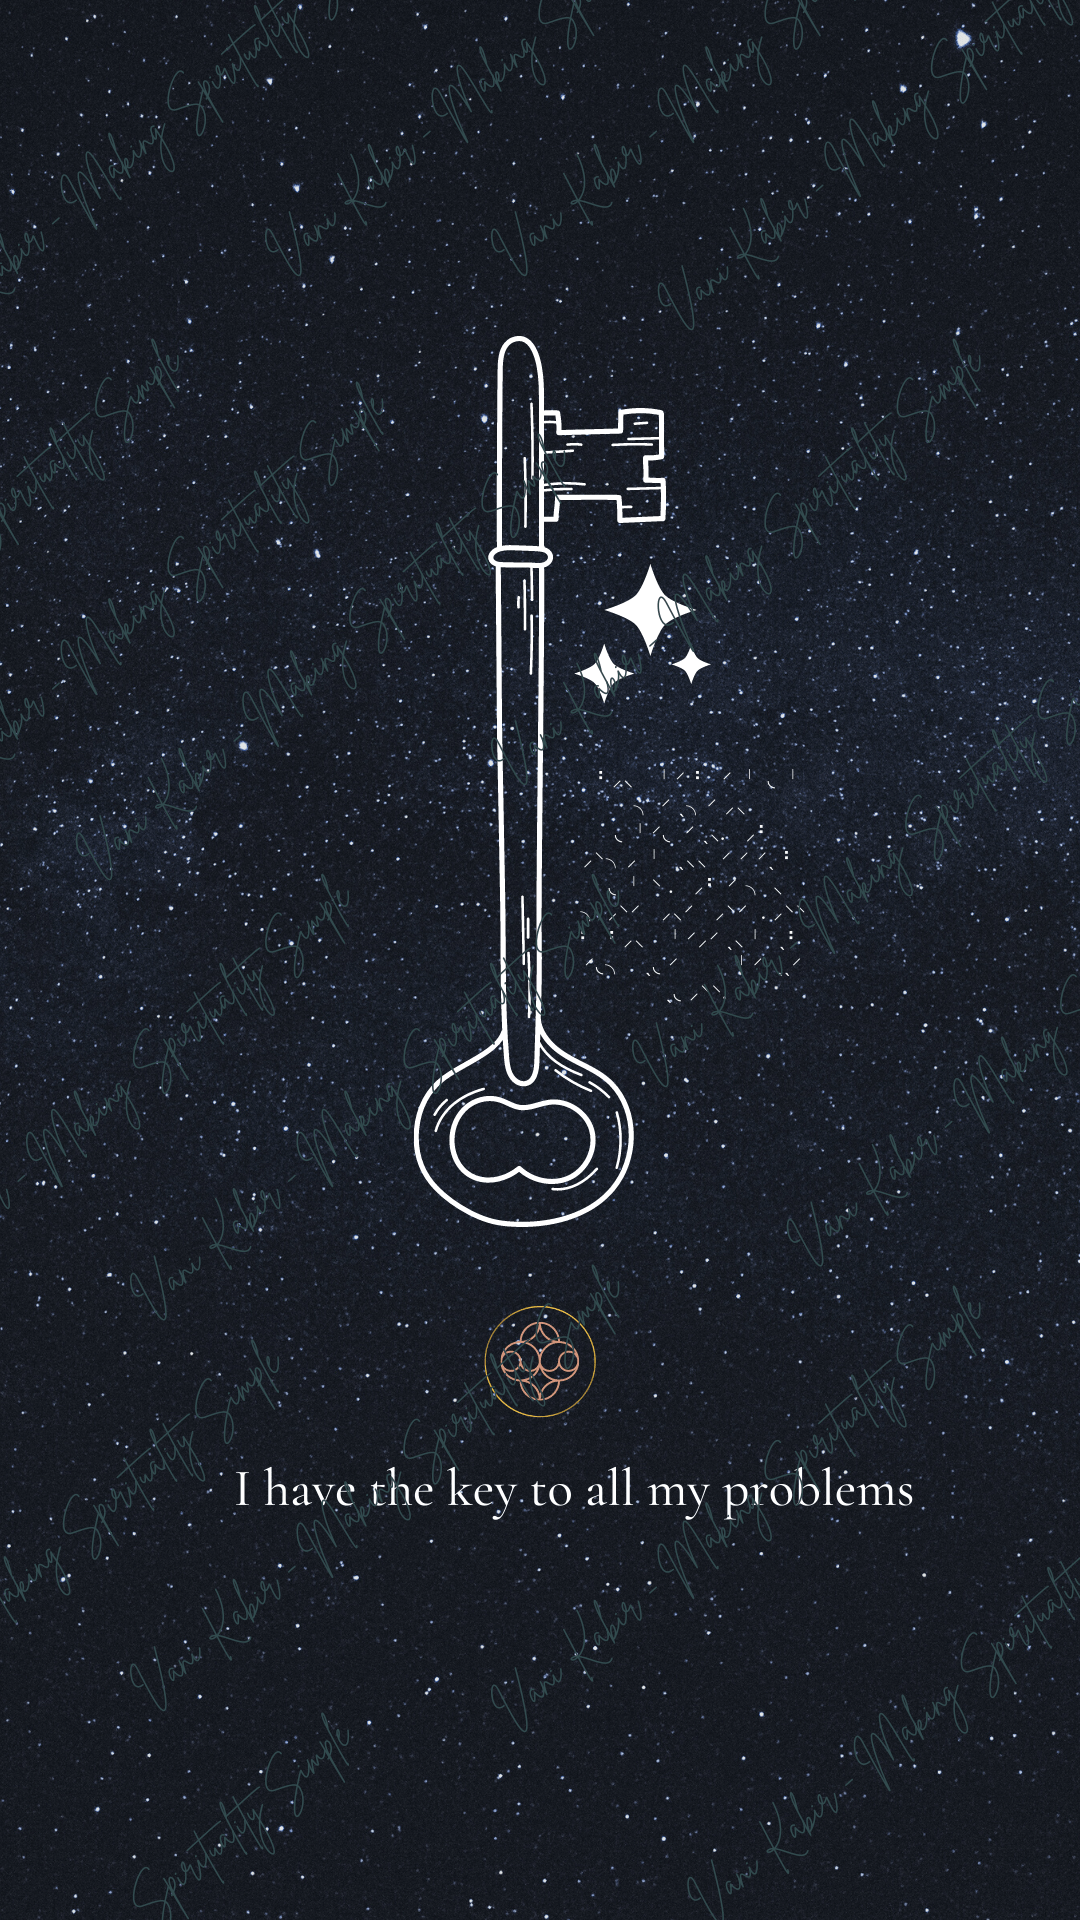 Iphone wallpaper with a key on a starry background - Spiritual